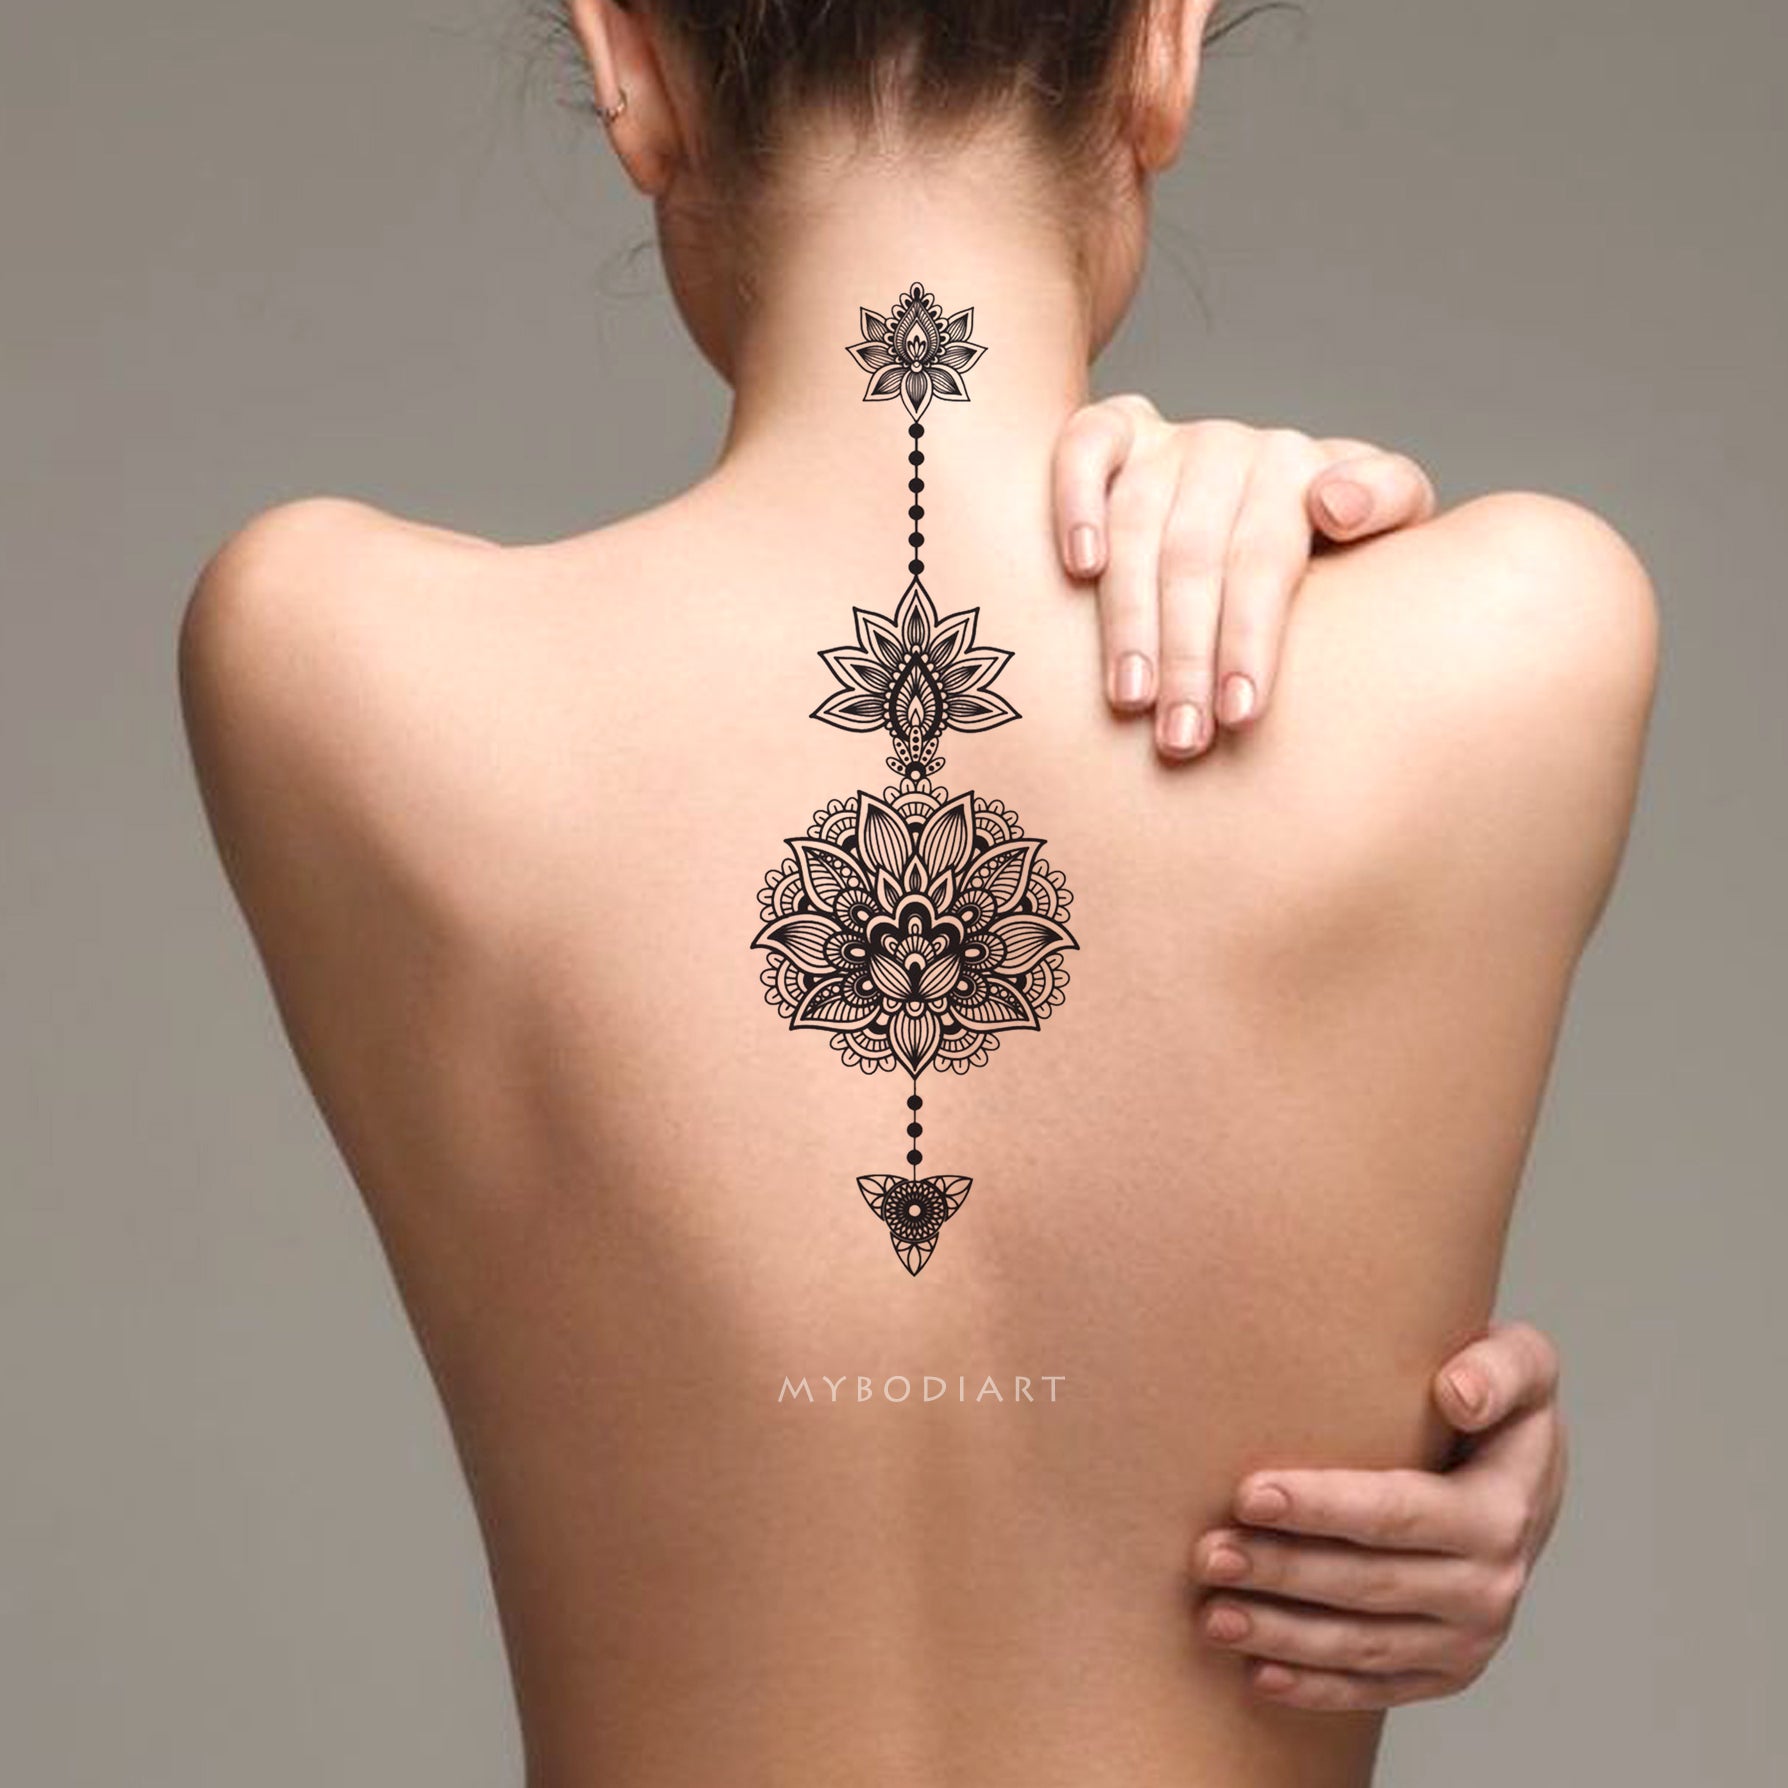 17 Spine Tattoo Designs That Will Chill You To The Bone  Cultura Colectiva